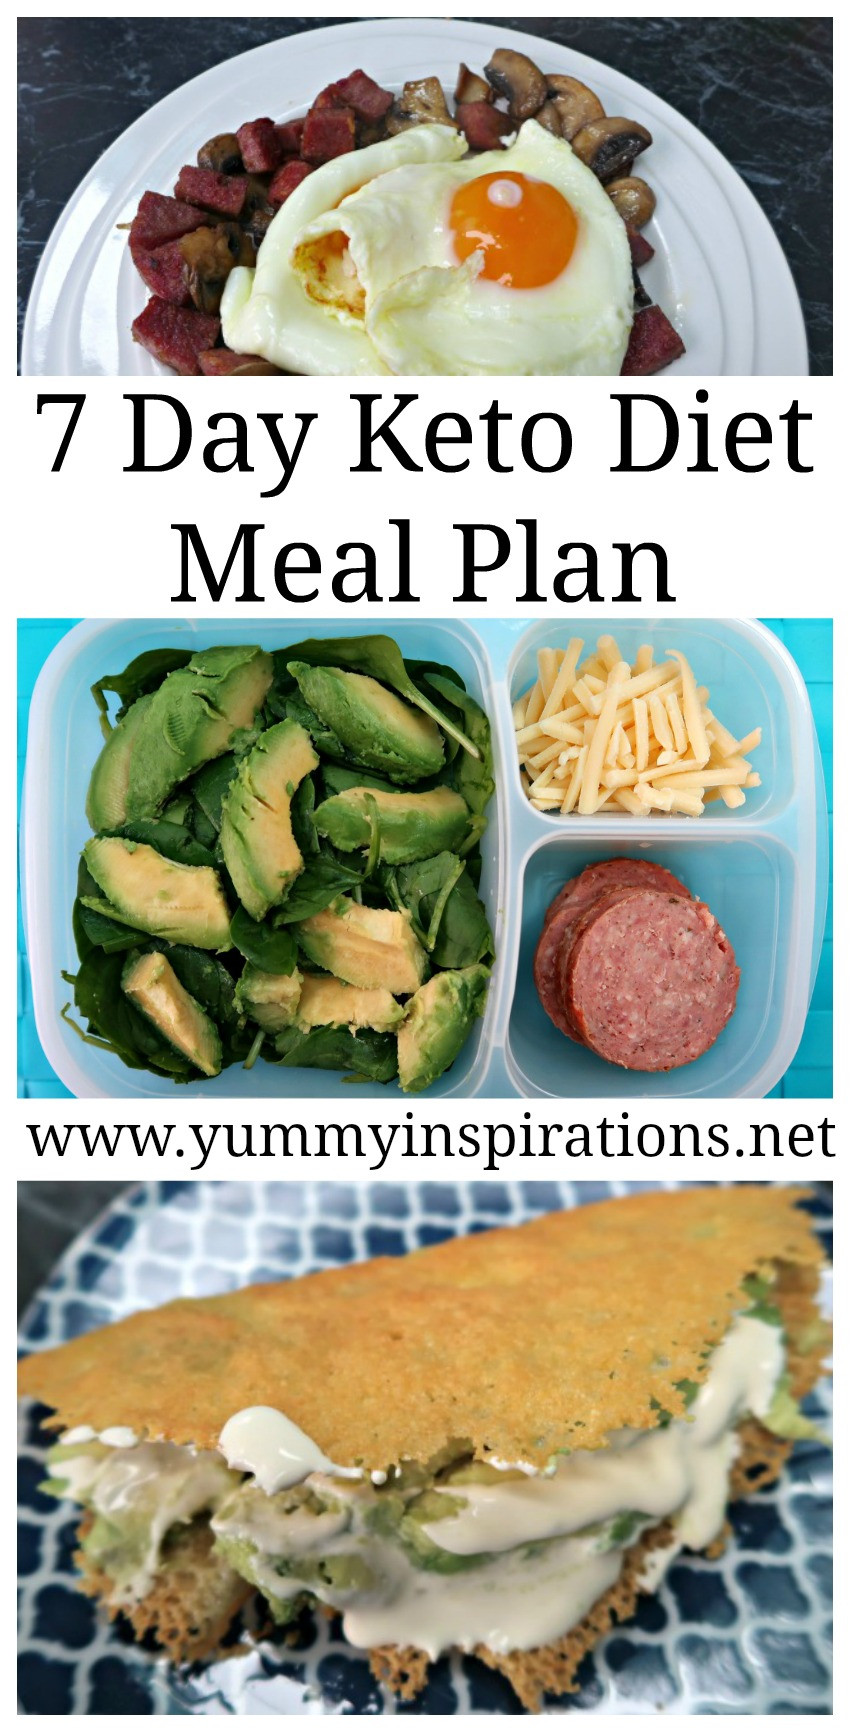 Keto Diet Meal Plan Losing Weight
 7 Day Keto Diet Meal Plan For Weight Loss Ketogenic Foods